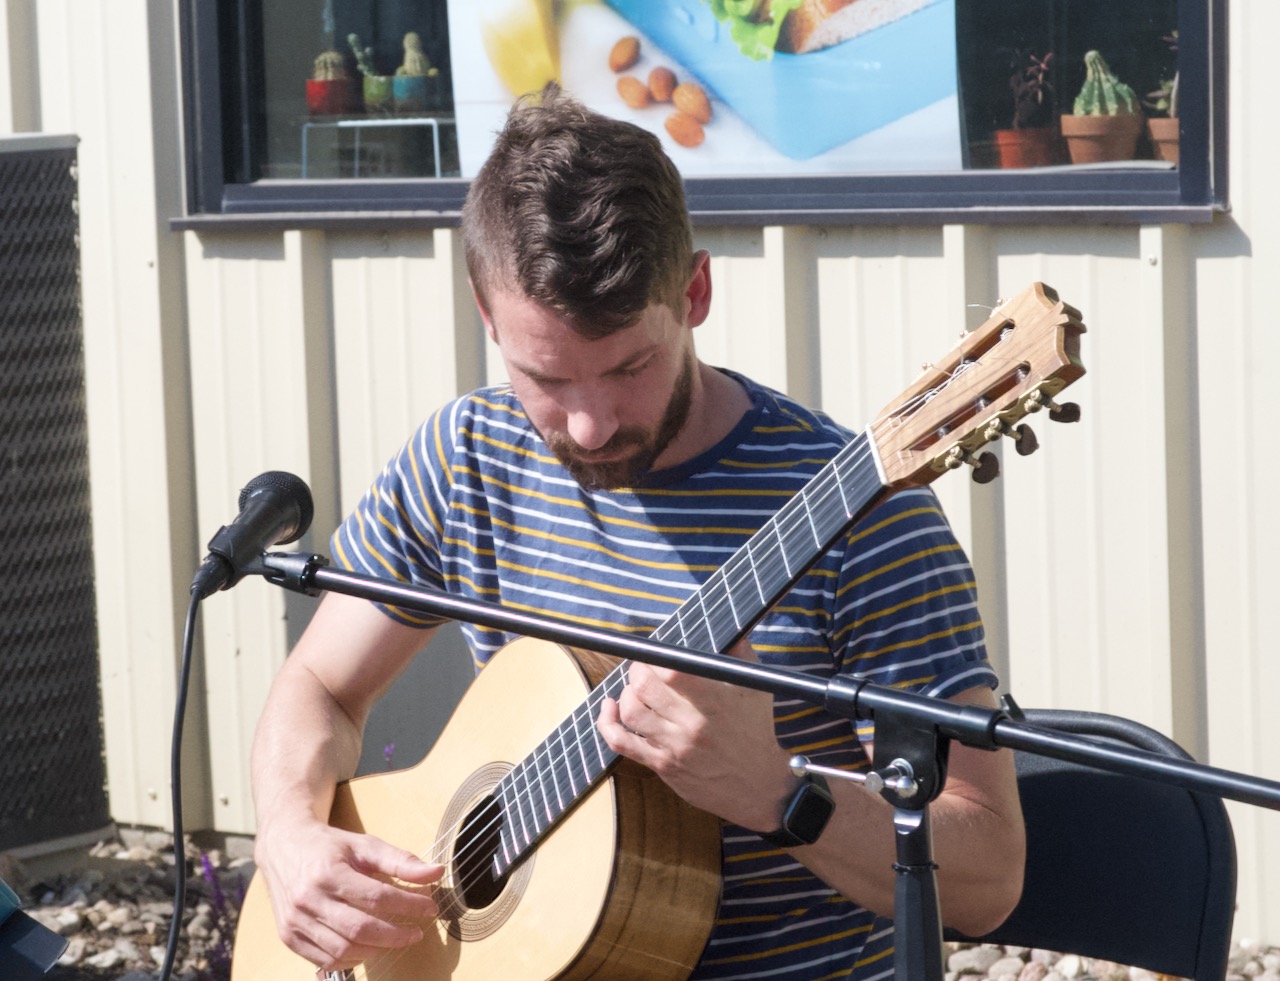 Stan Shelnutt provided entertainment at Natural Abundance Saturday, Sept. 9 during its 45th anniversary celebration and Fresher is Fun local harvest celebration. Aberdeen Insider photo by Elisa Sand